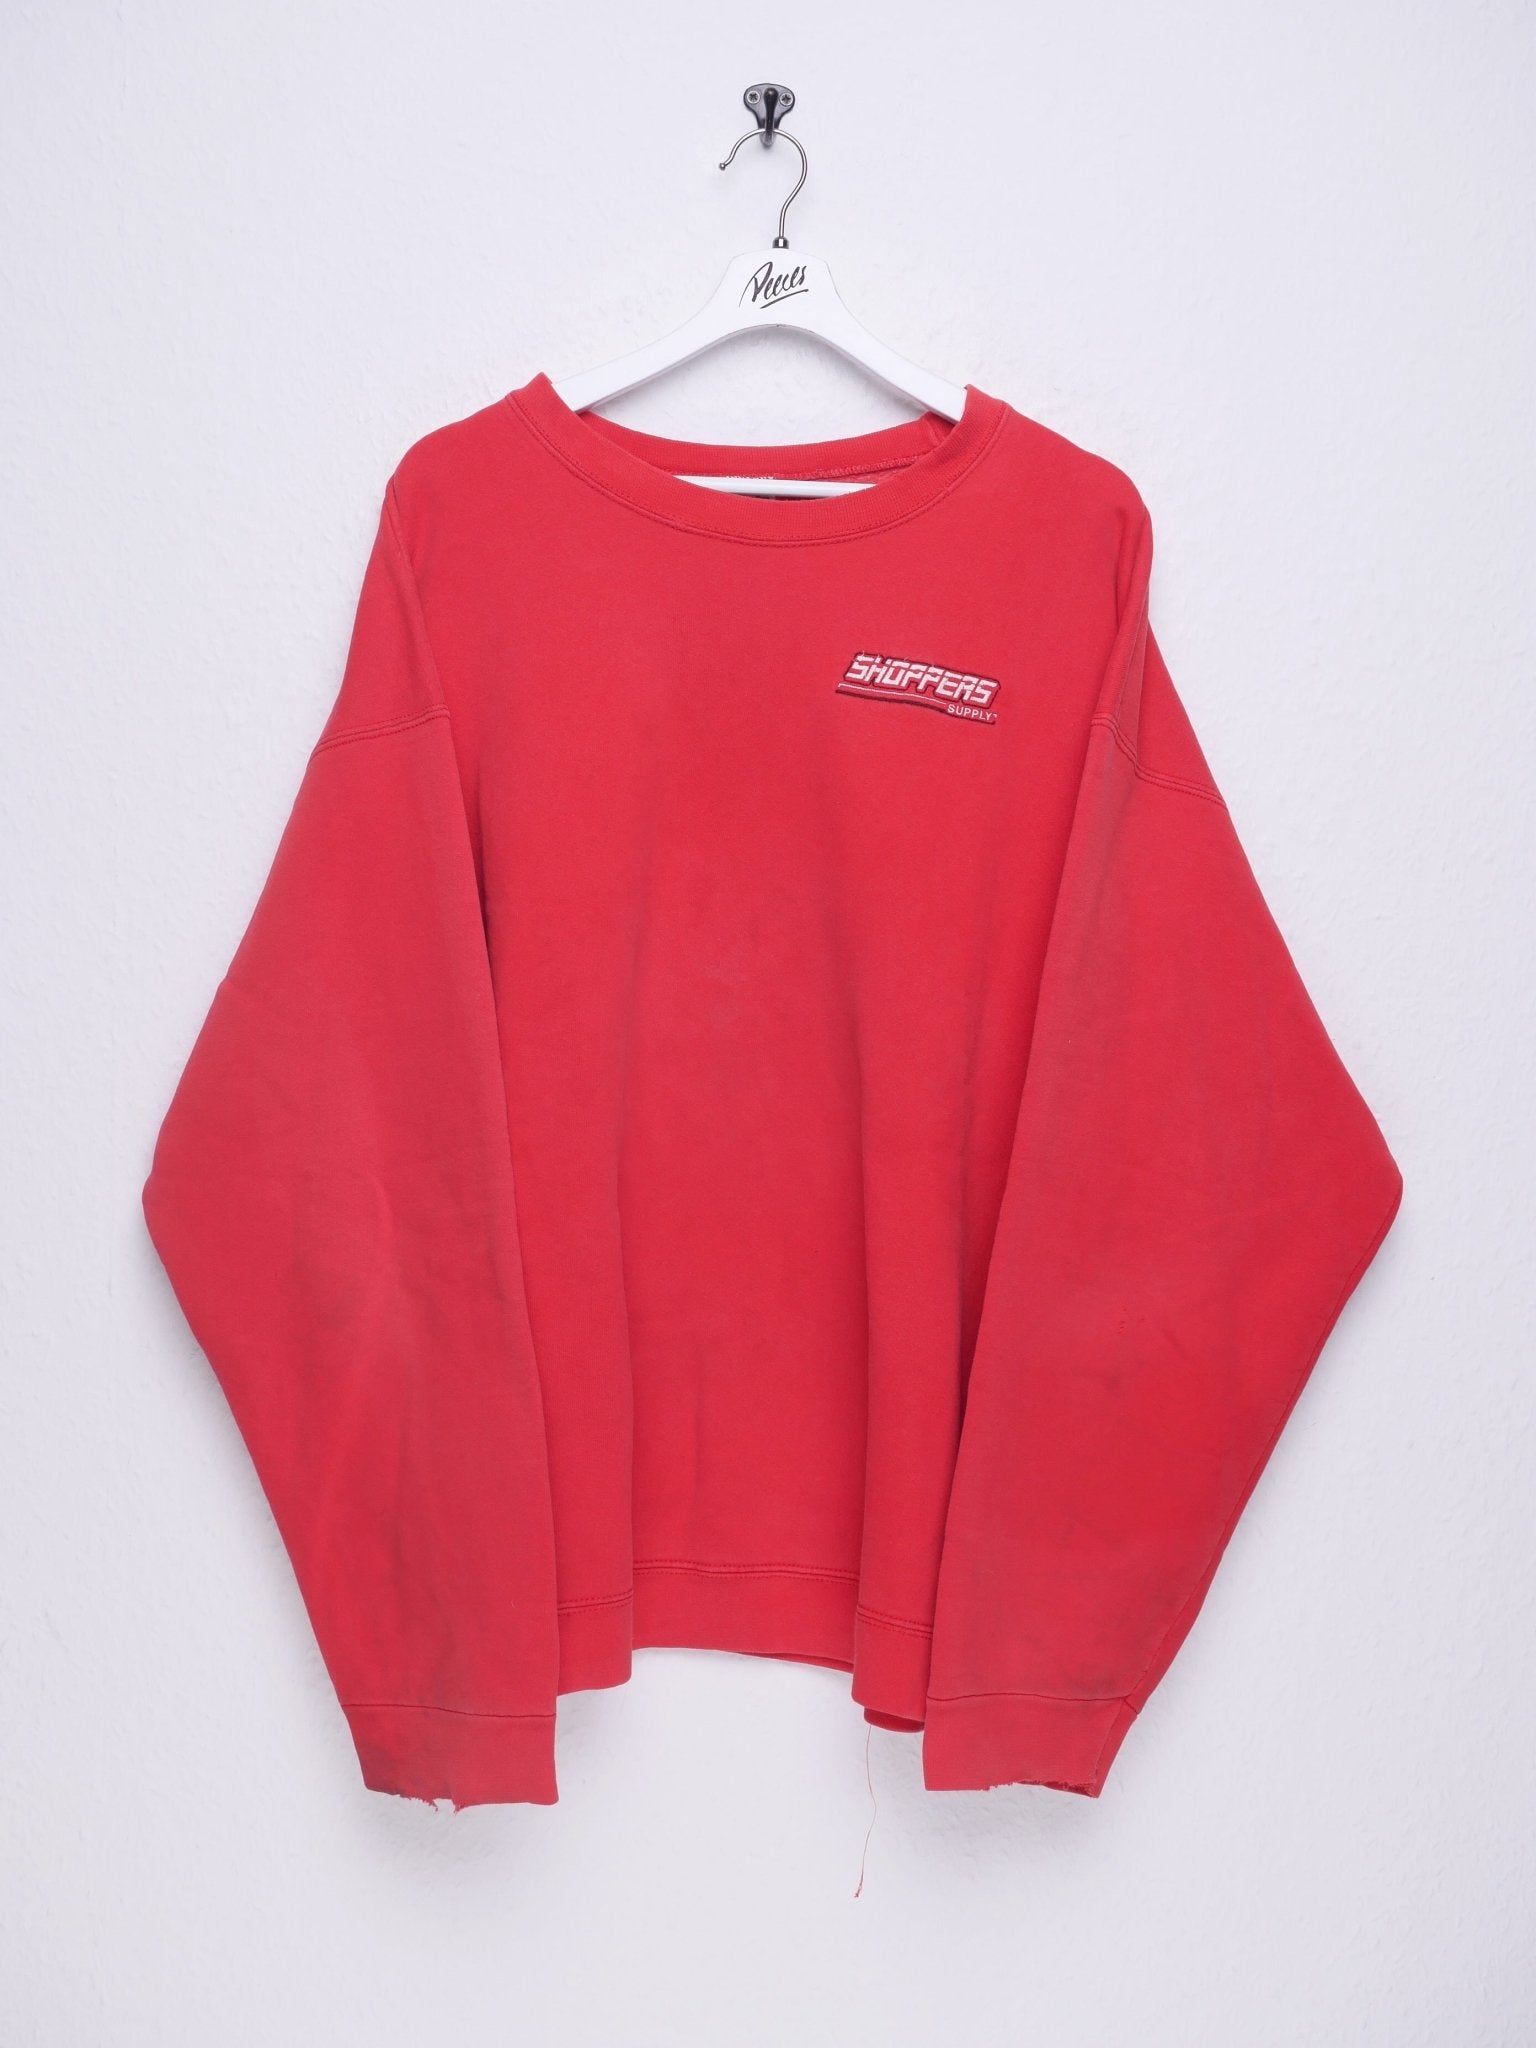 Shoppers Supply embroidered Spellout red Sweater - Peeces